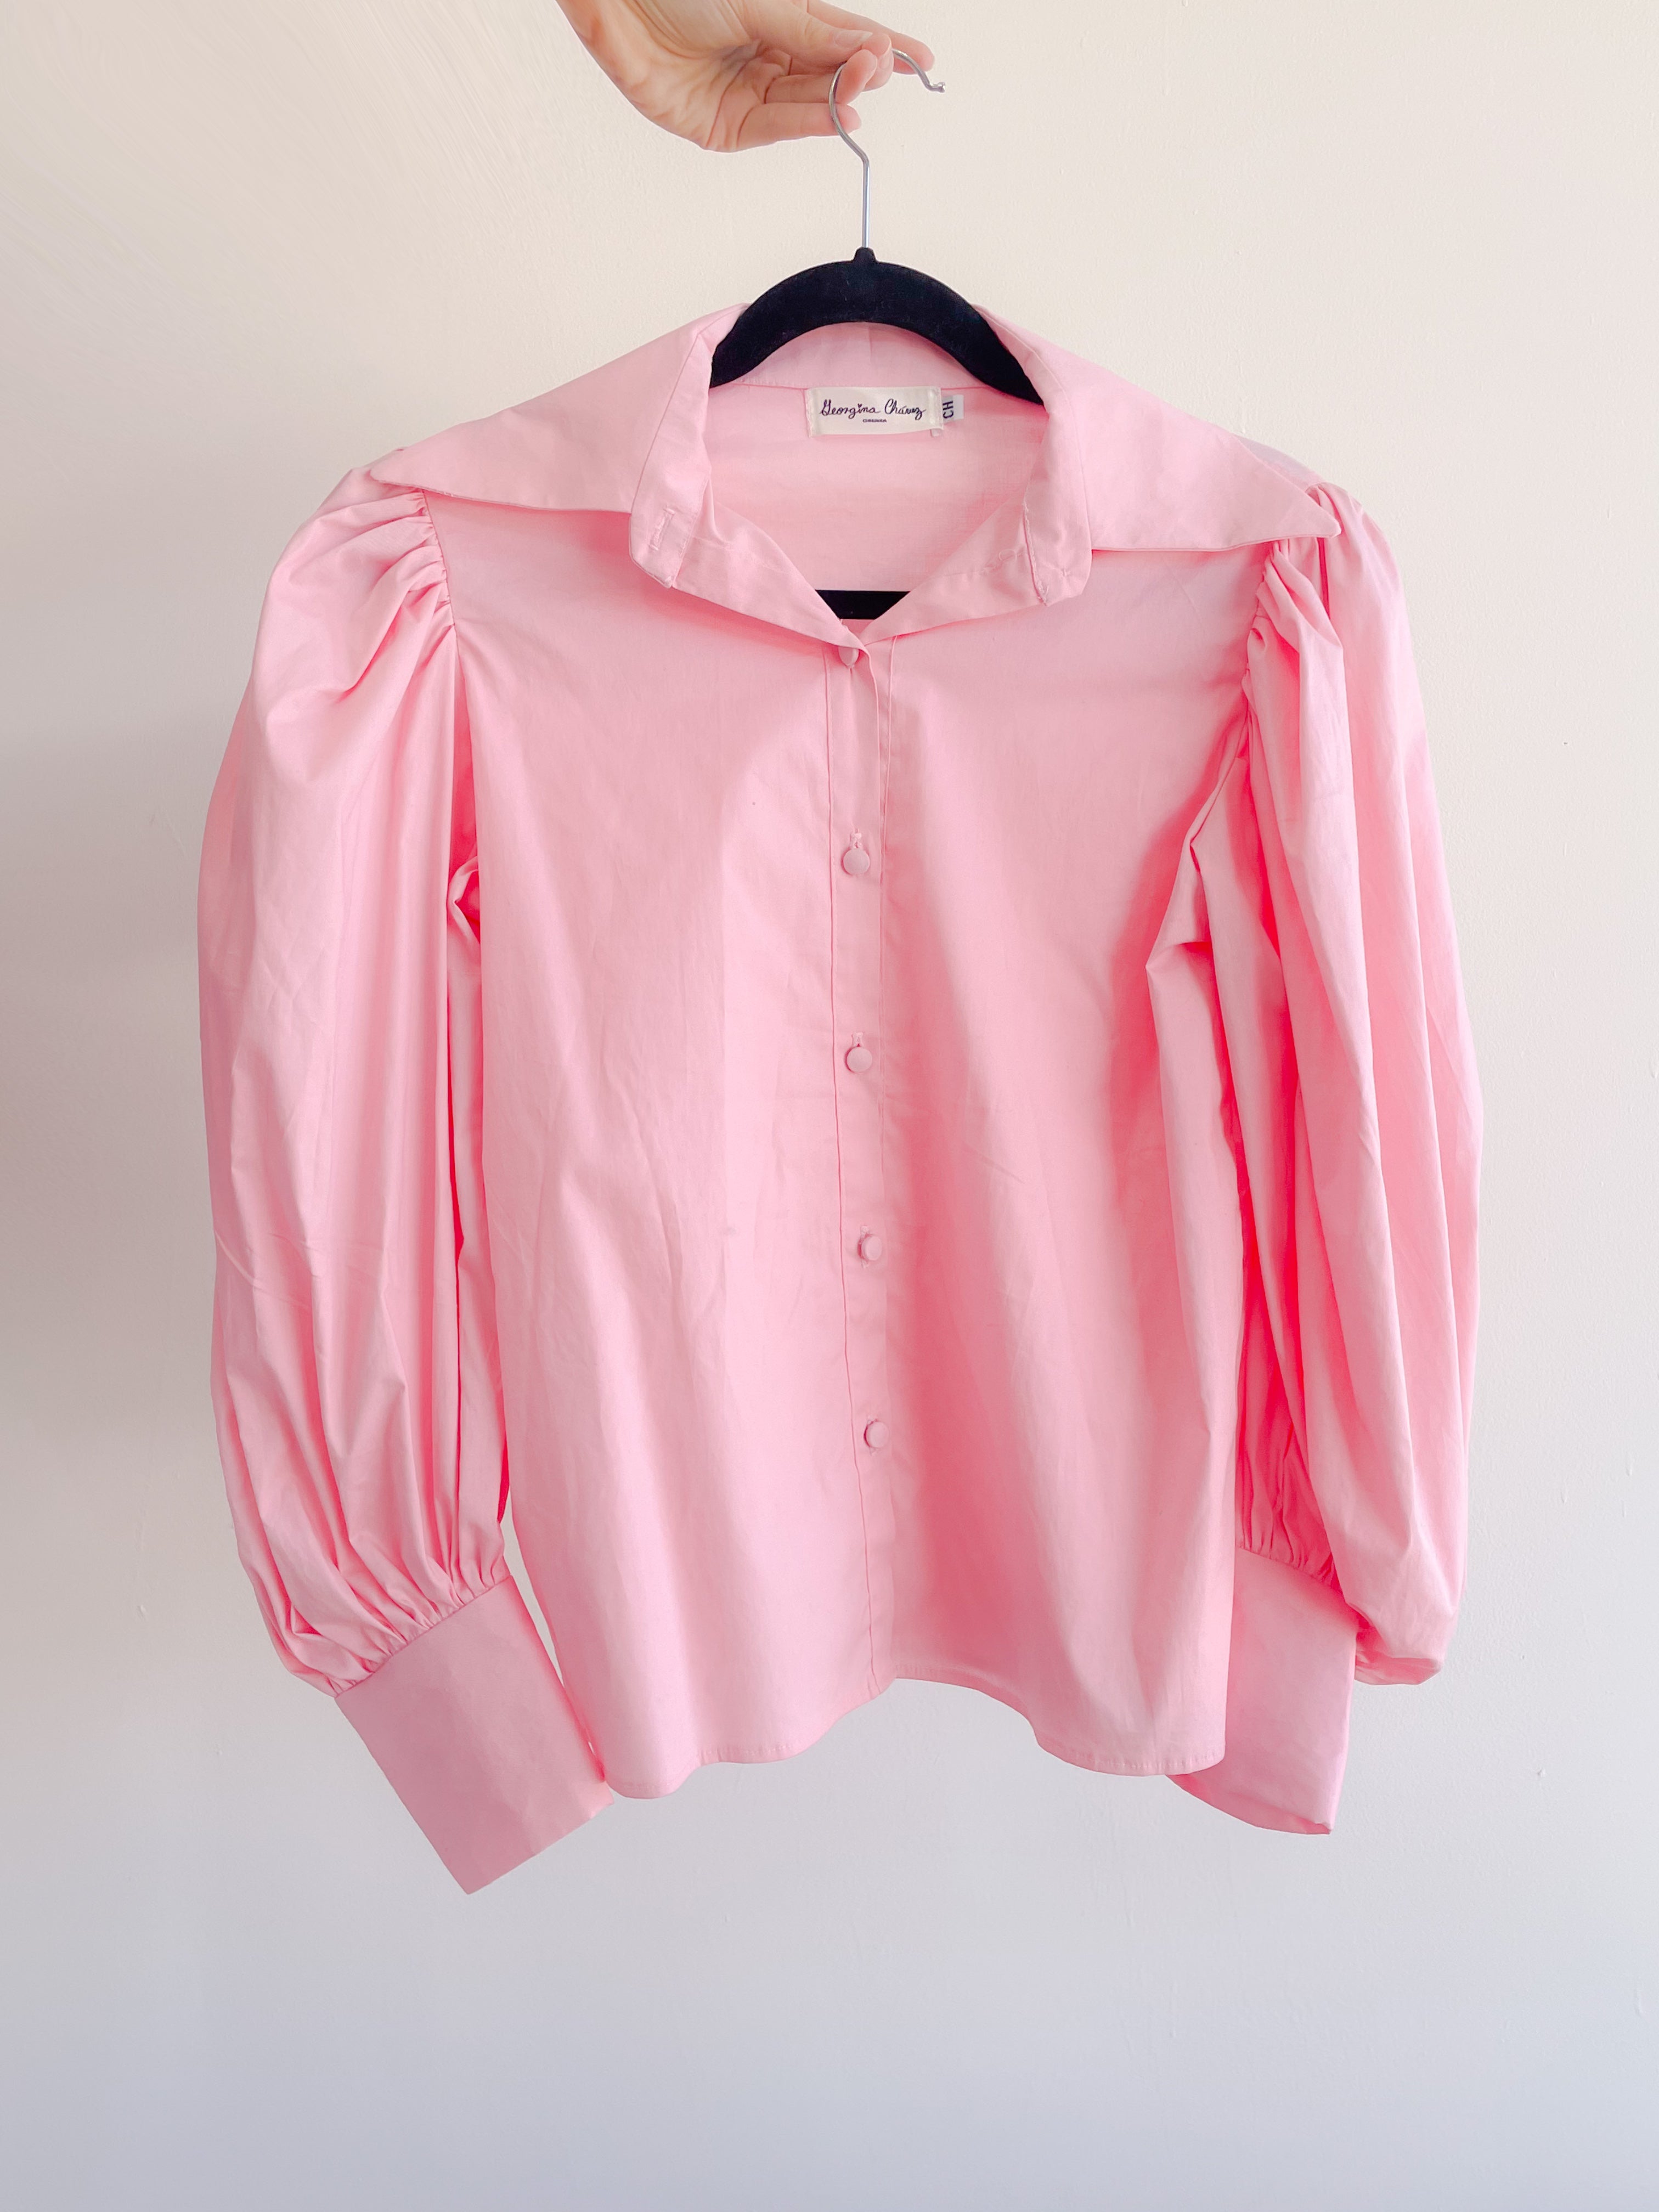 Pastel Pink Blouse with Balloon Sleeves Size S IMMEDIATE SHIPPING/DELIVERY